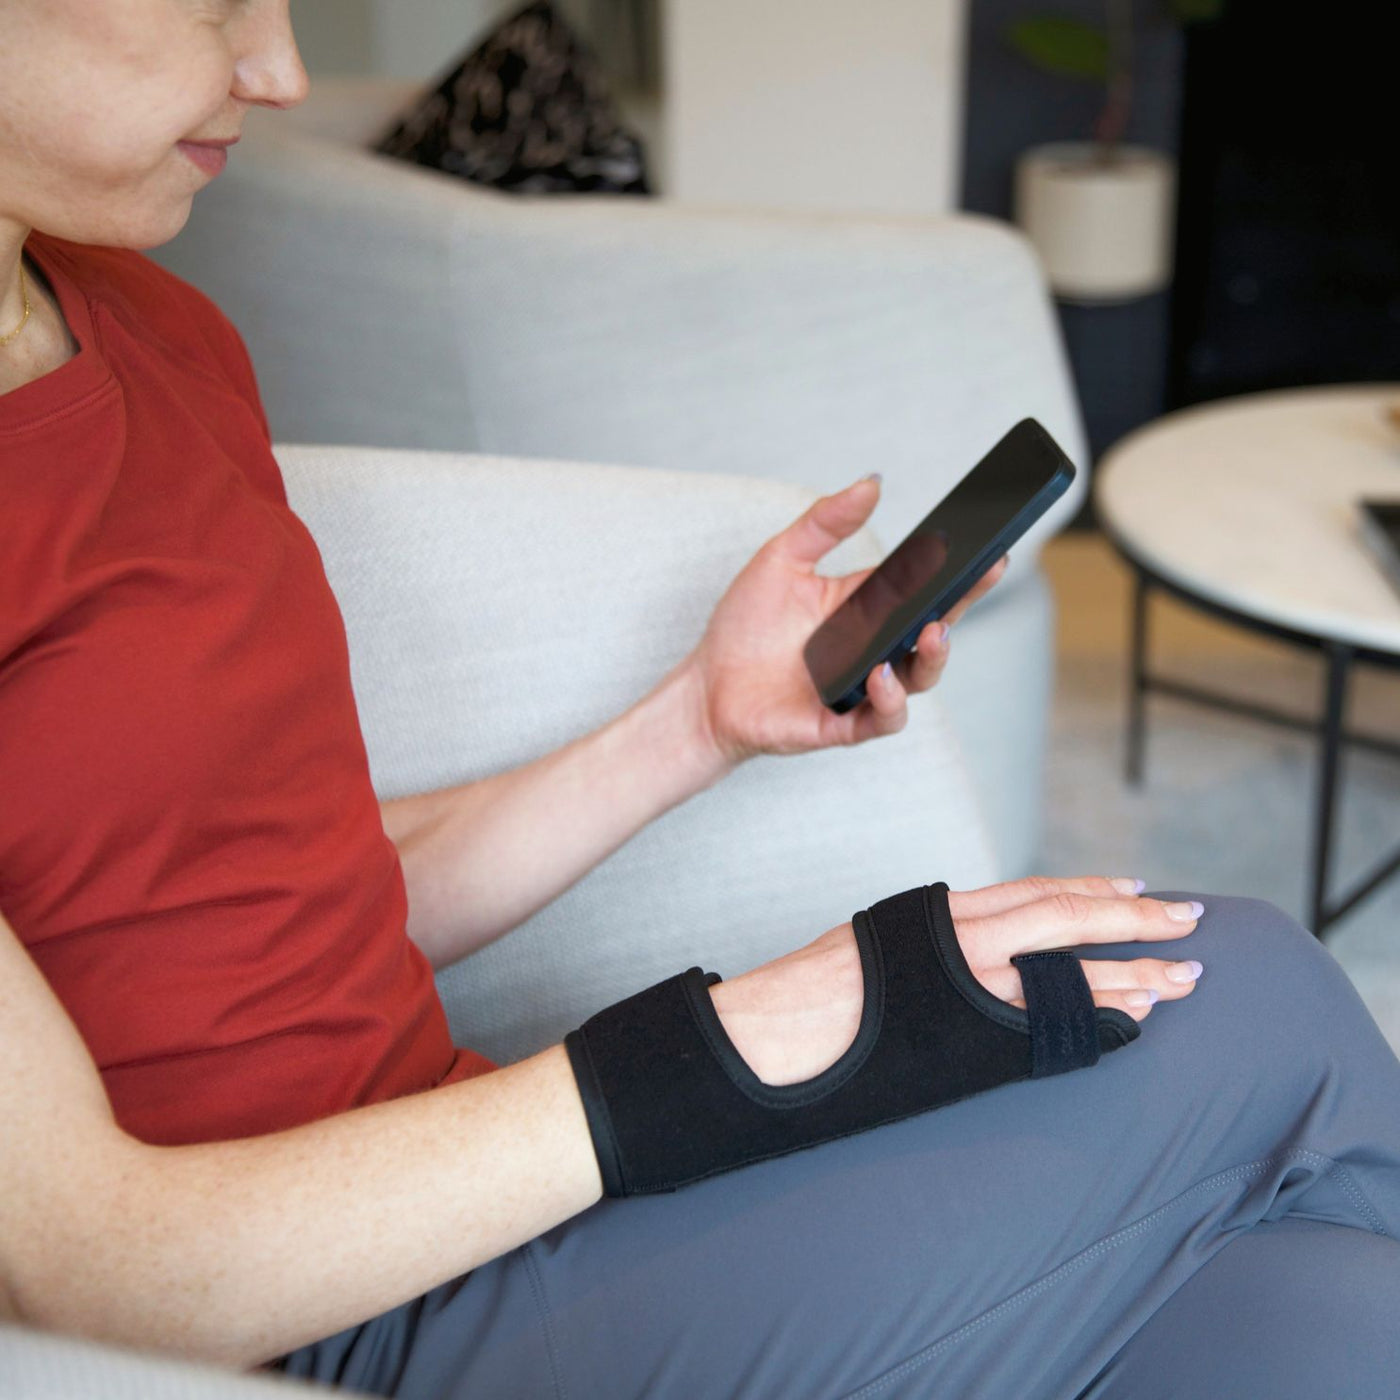 The metacarpal fracture splint for pinky finger injuries fits men and women